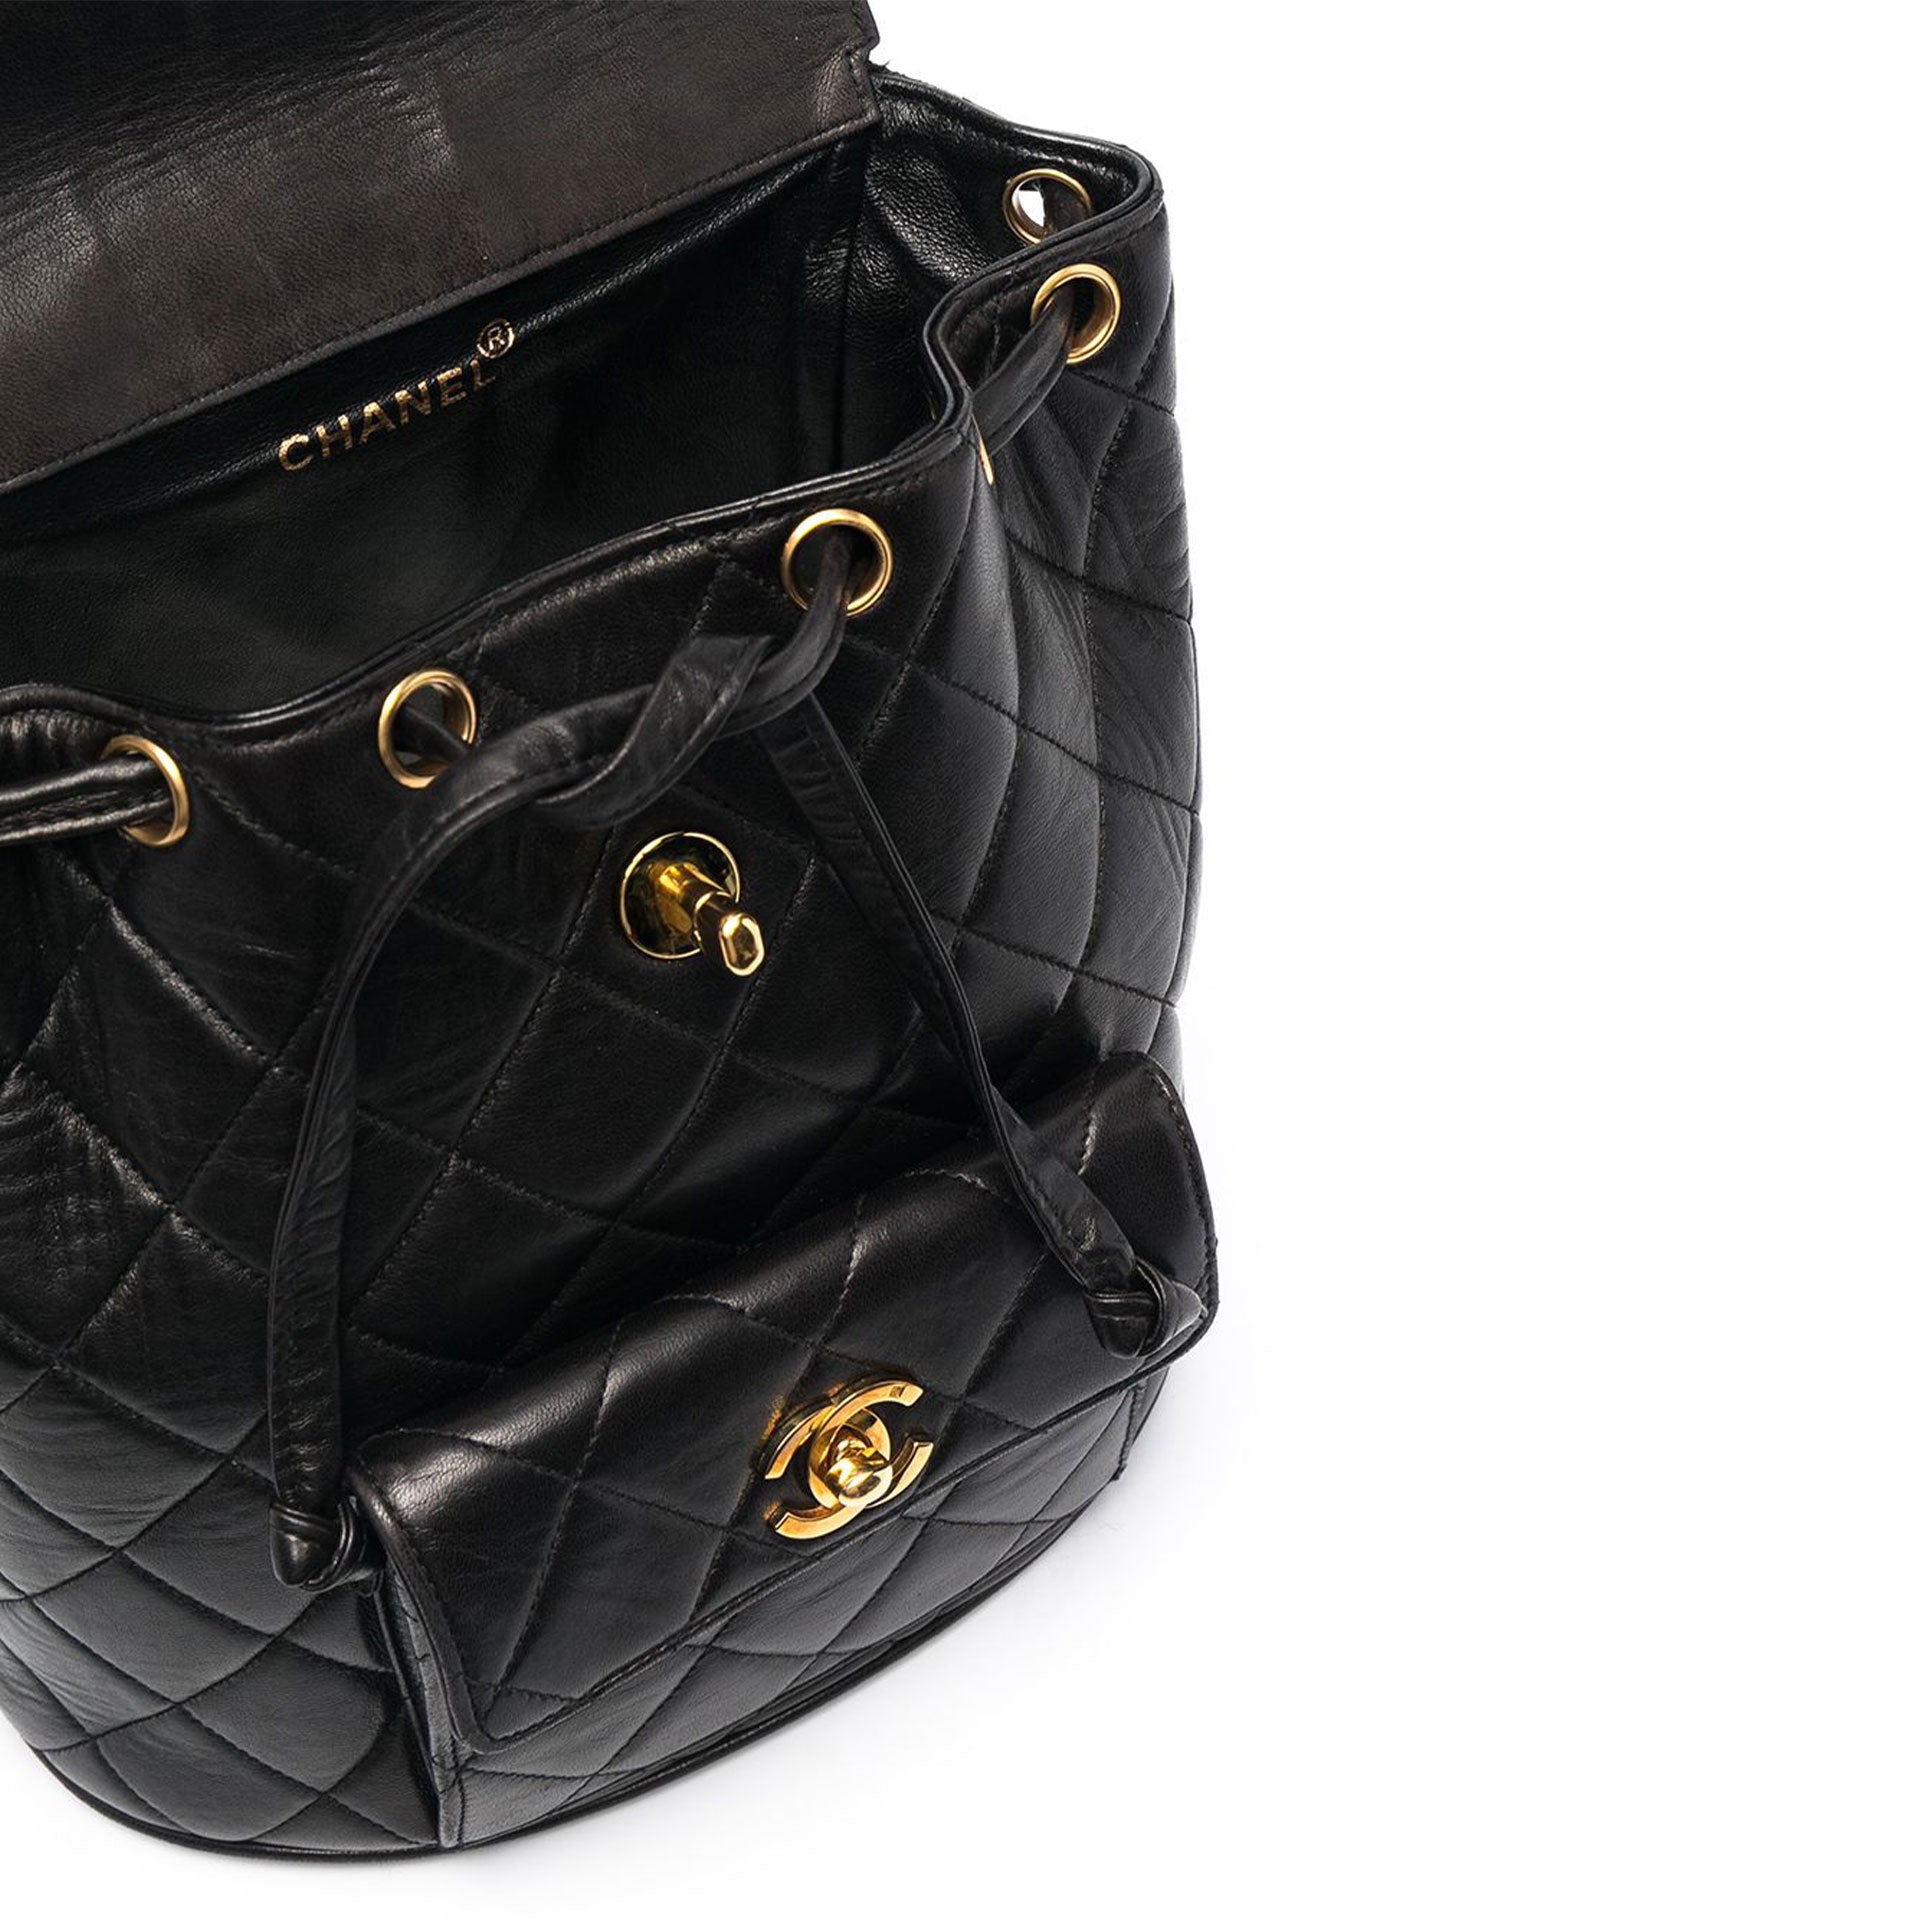 Chanel Black Lambskin Quilted 90's Vintage Backpack – House of Carver